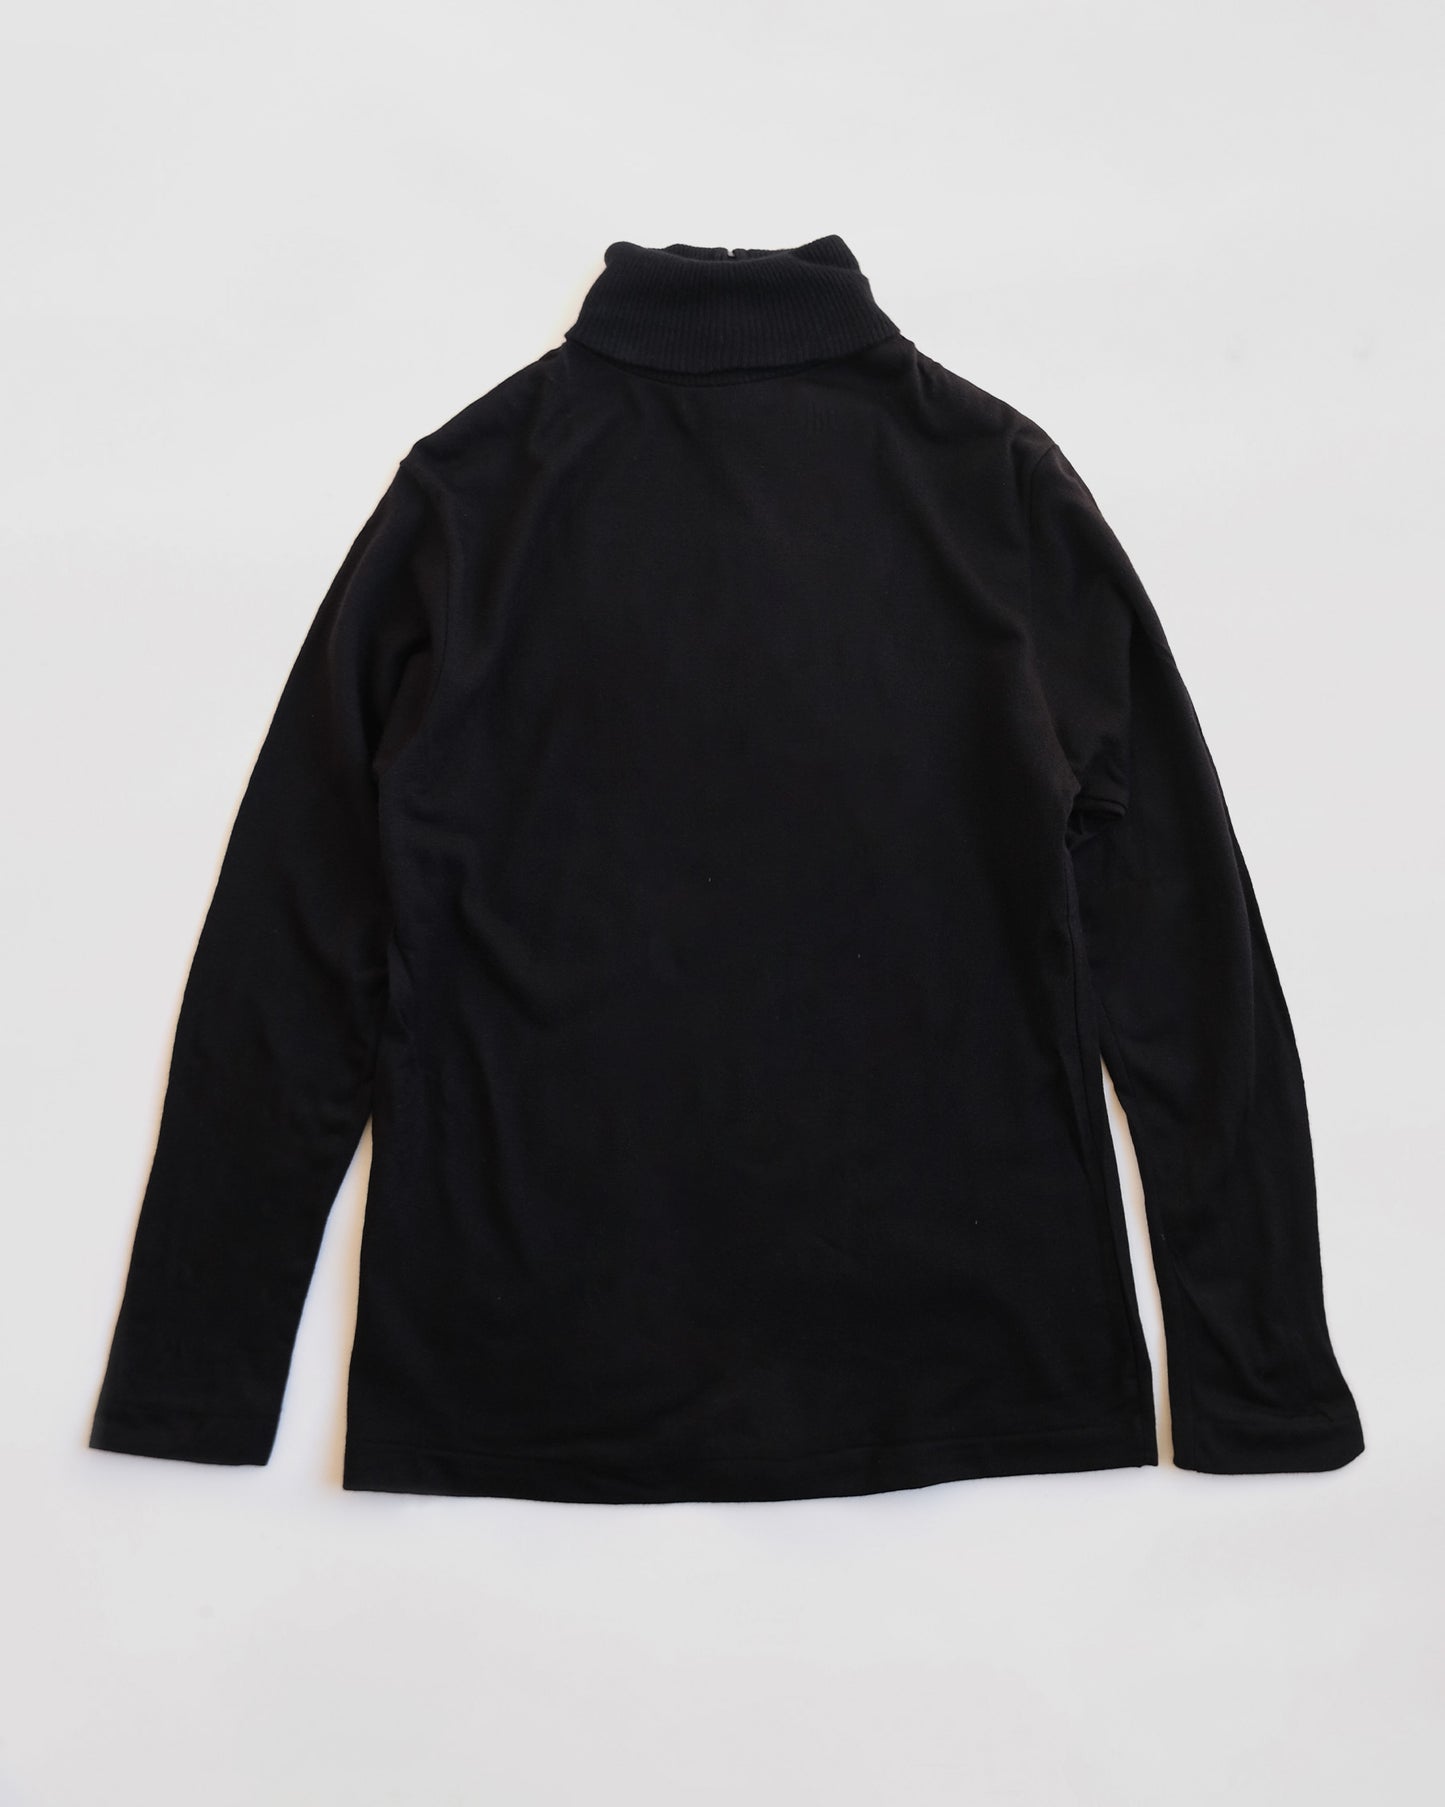 NOS Turtleneck Sweater with Back Zippier